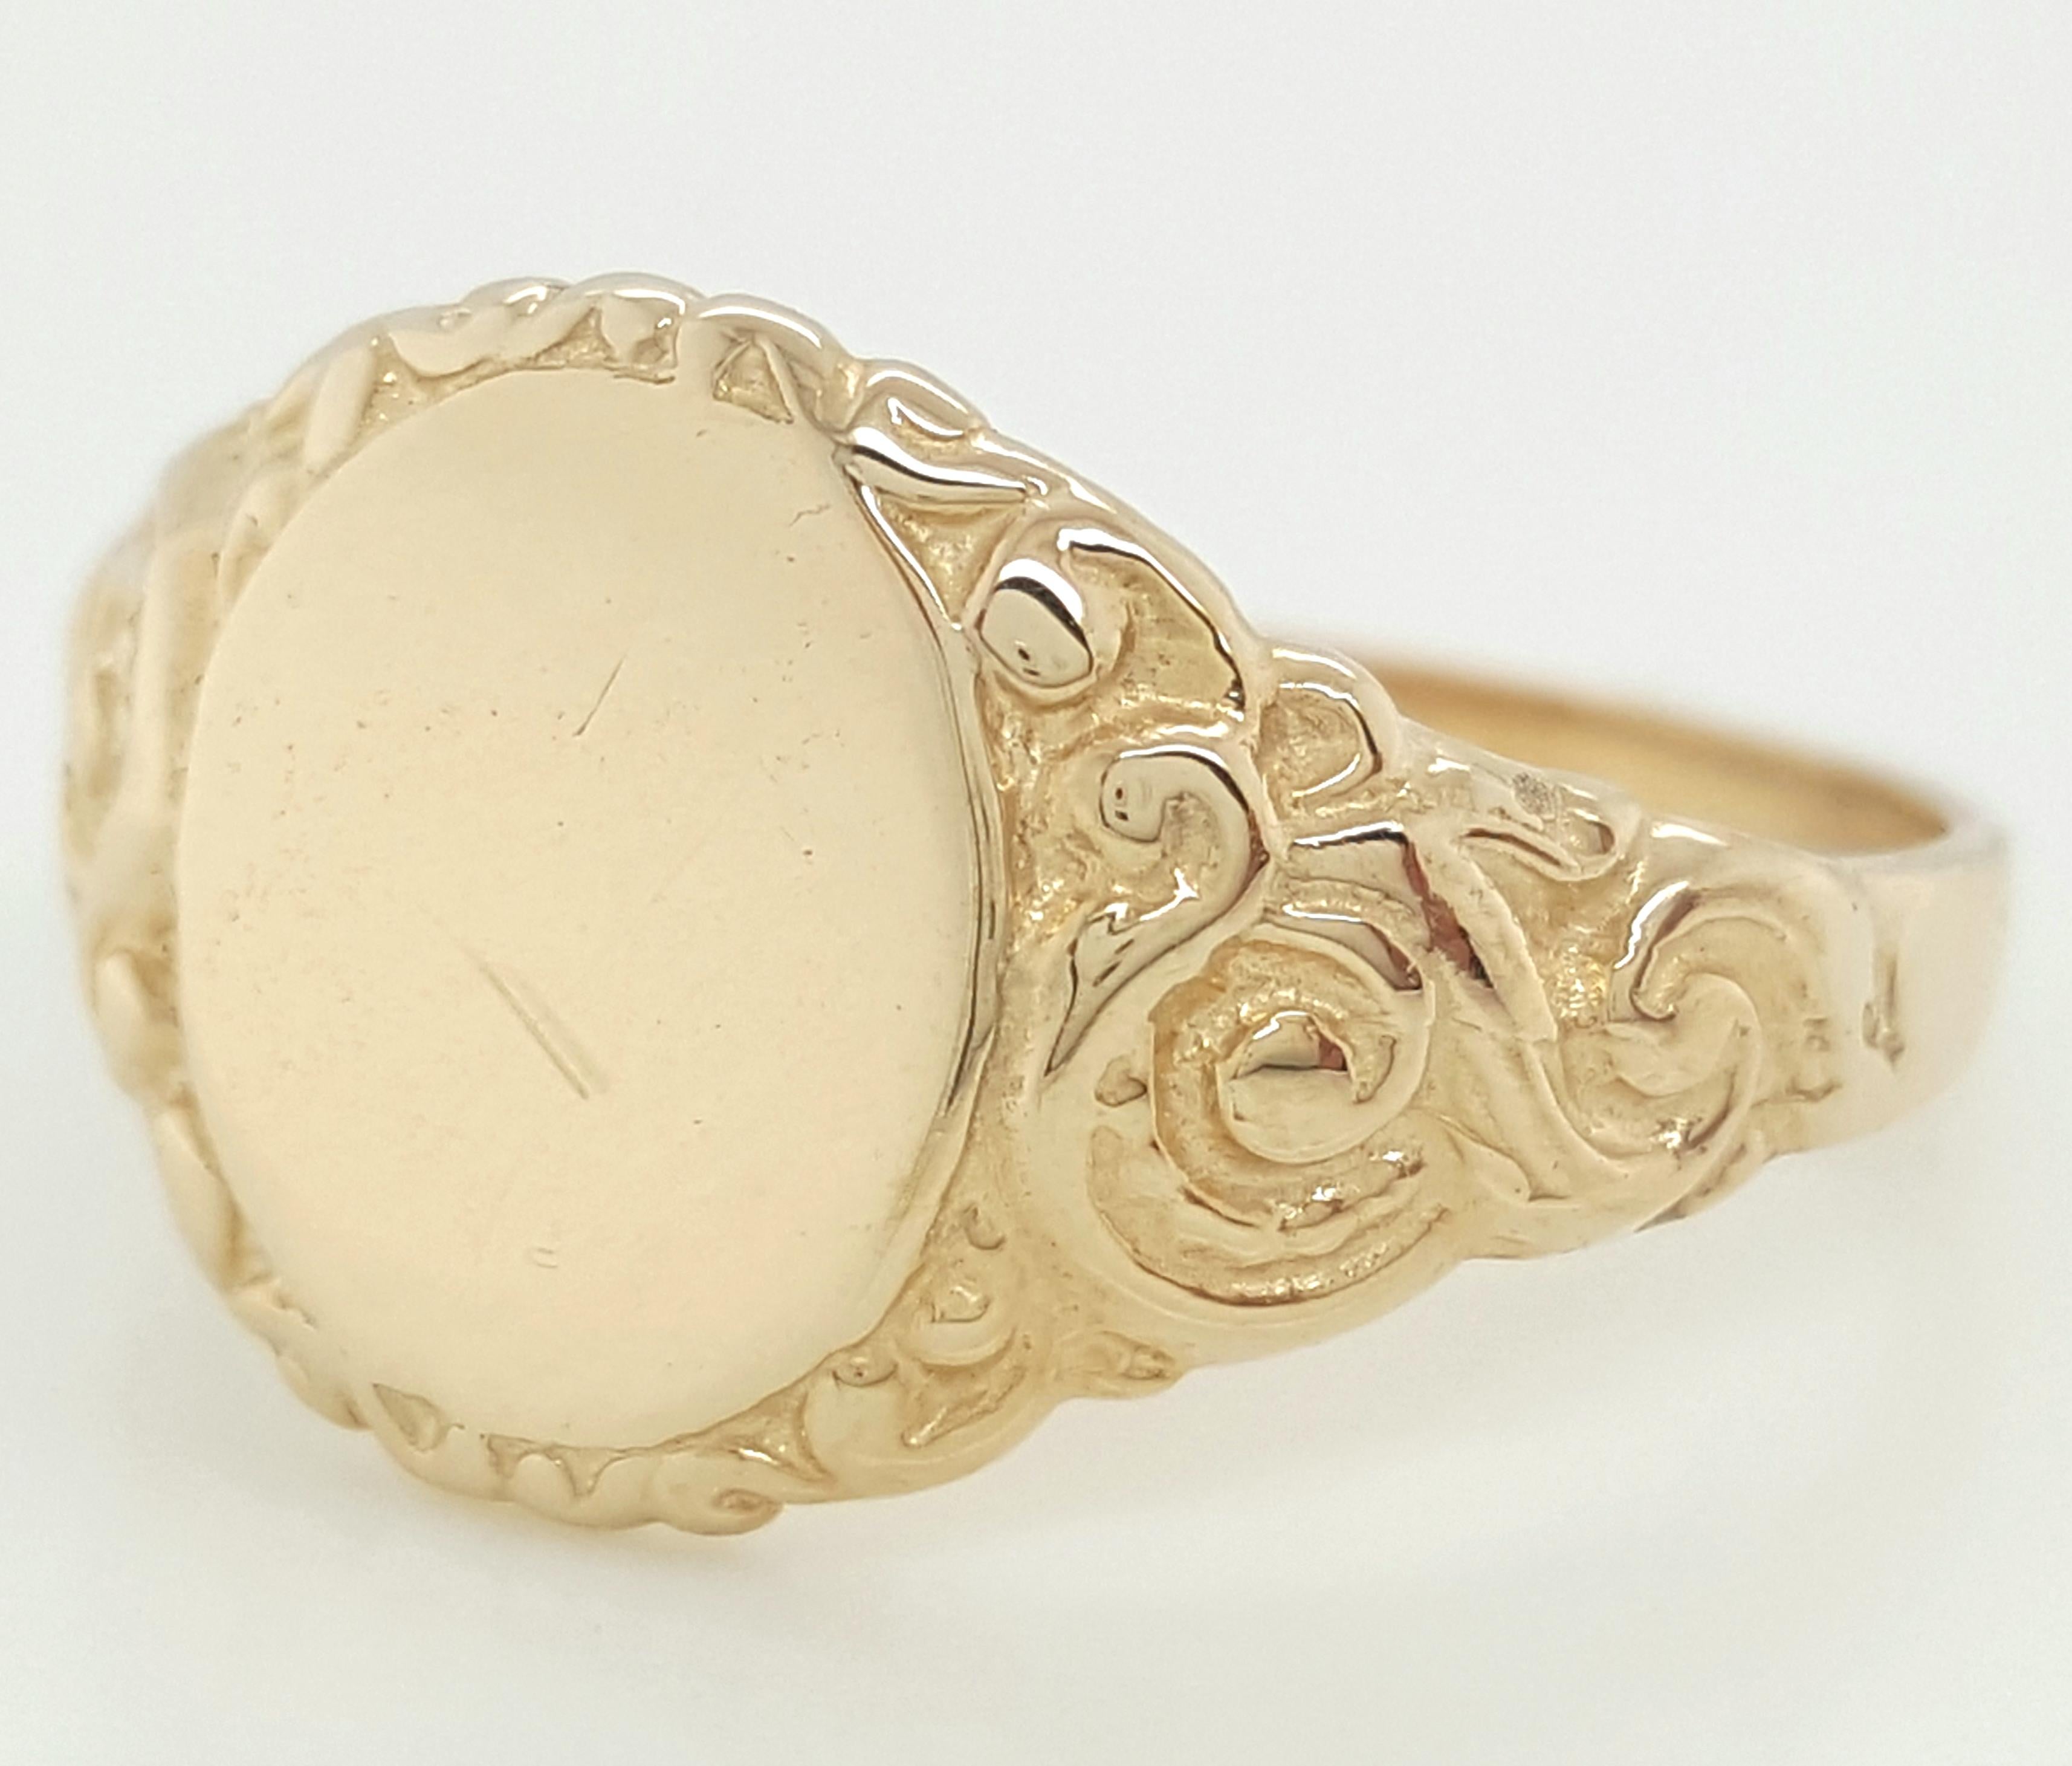 Here we have a genuine Art Deco Signet ring crafted in 14 karat yellow gold! These yellow gold vintage rings are tougher to find and this one is in great condition! These also look super cute stacked with other vintage bands!
Can be sized prior to